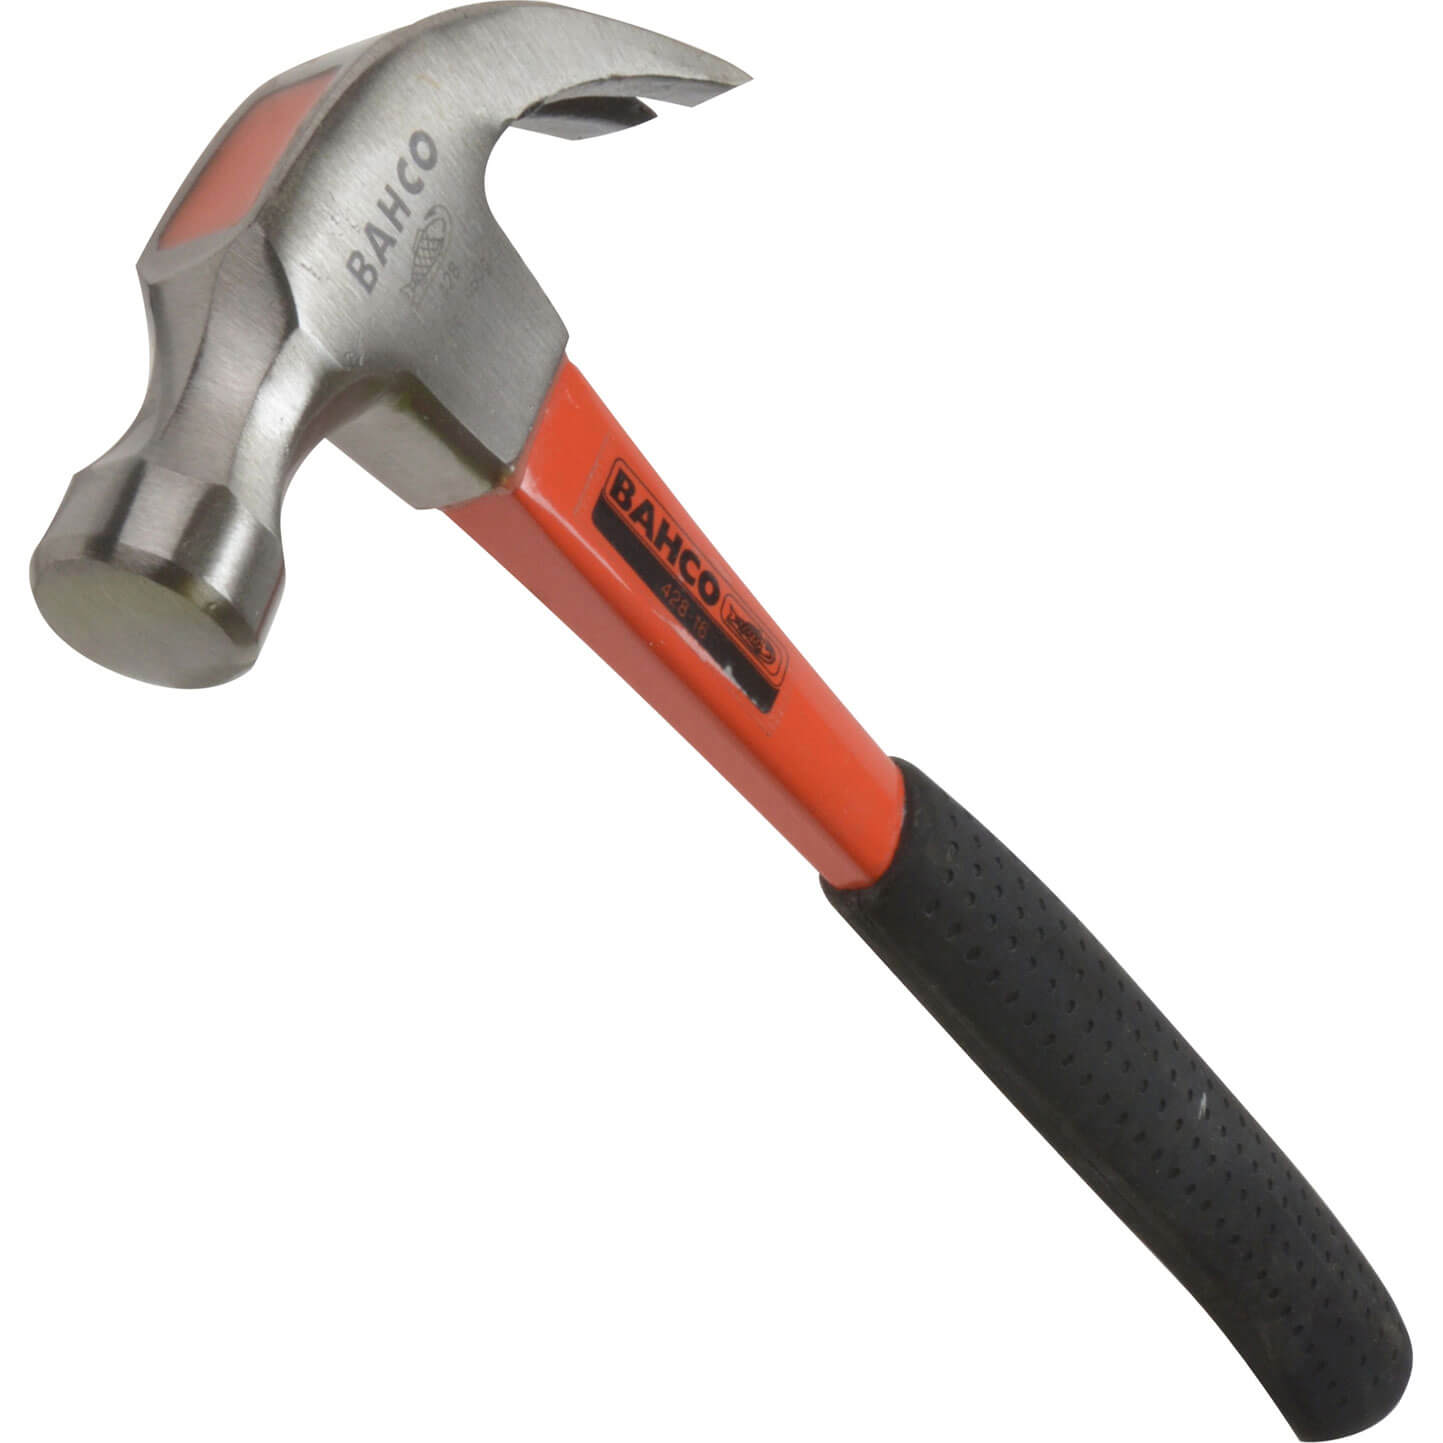 Image of Bahco Claw Hammer Glass Fibre Handle 16oz